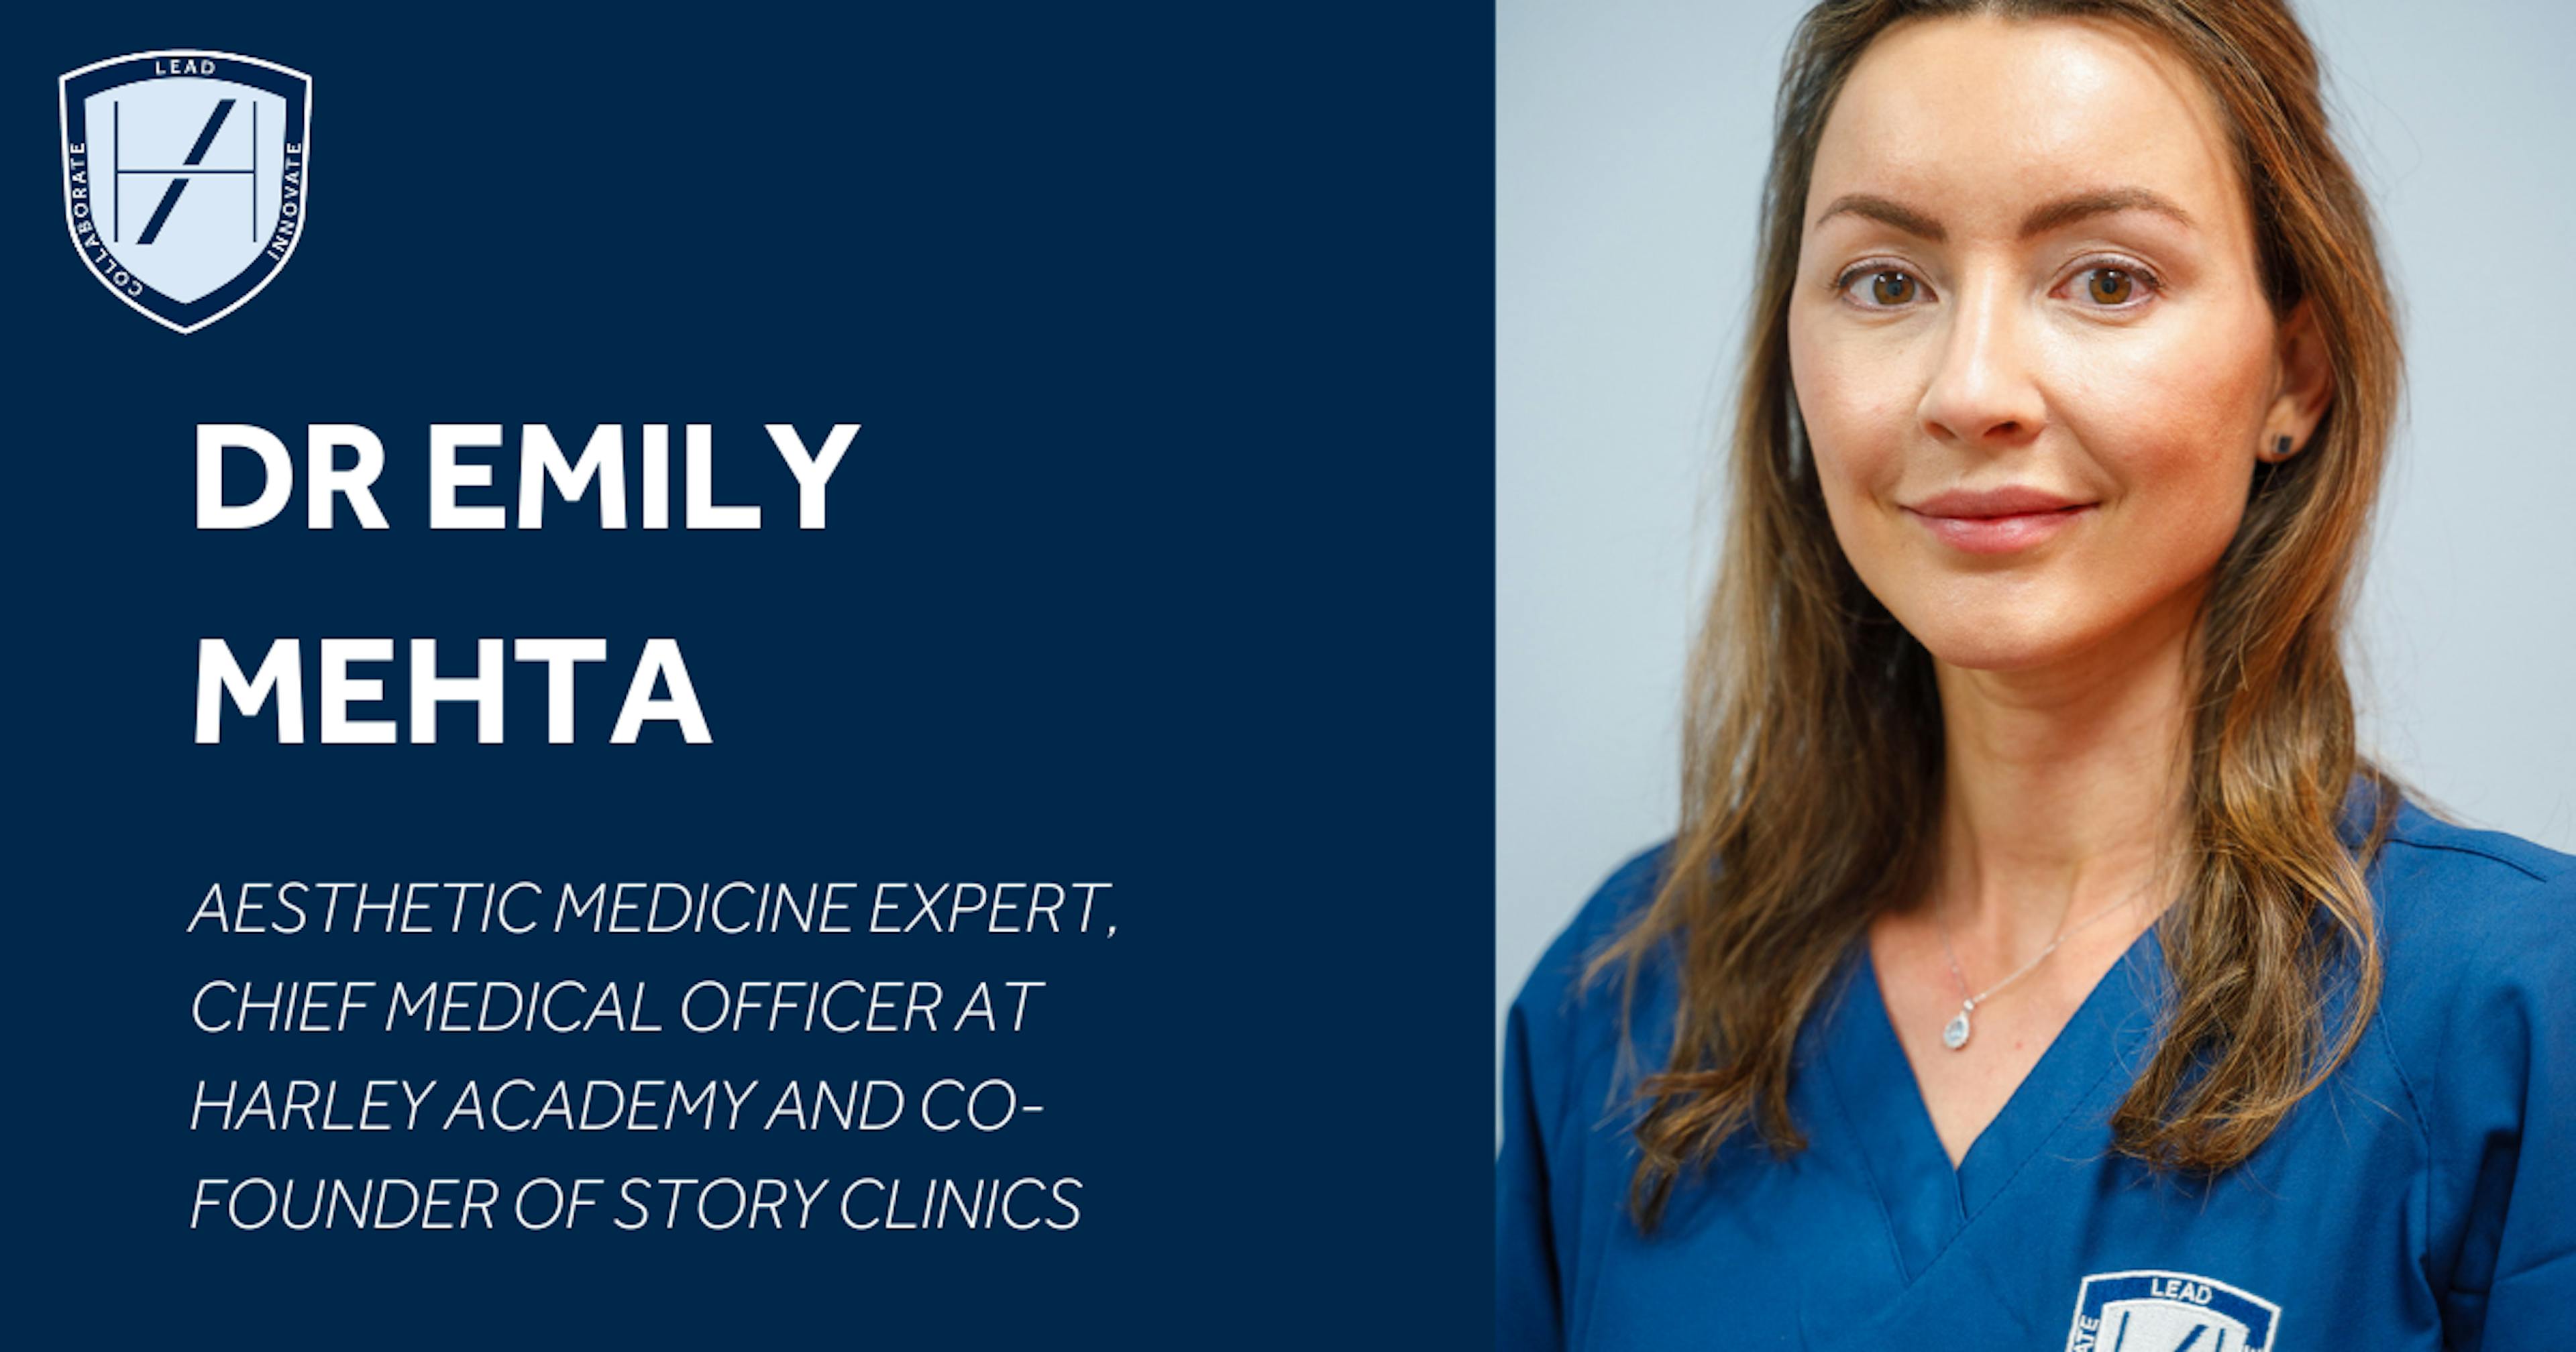 Dr Emily Mehta - Chief Medical Officer at Harley Academy